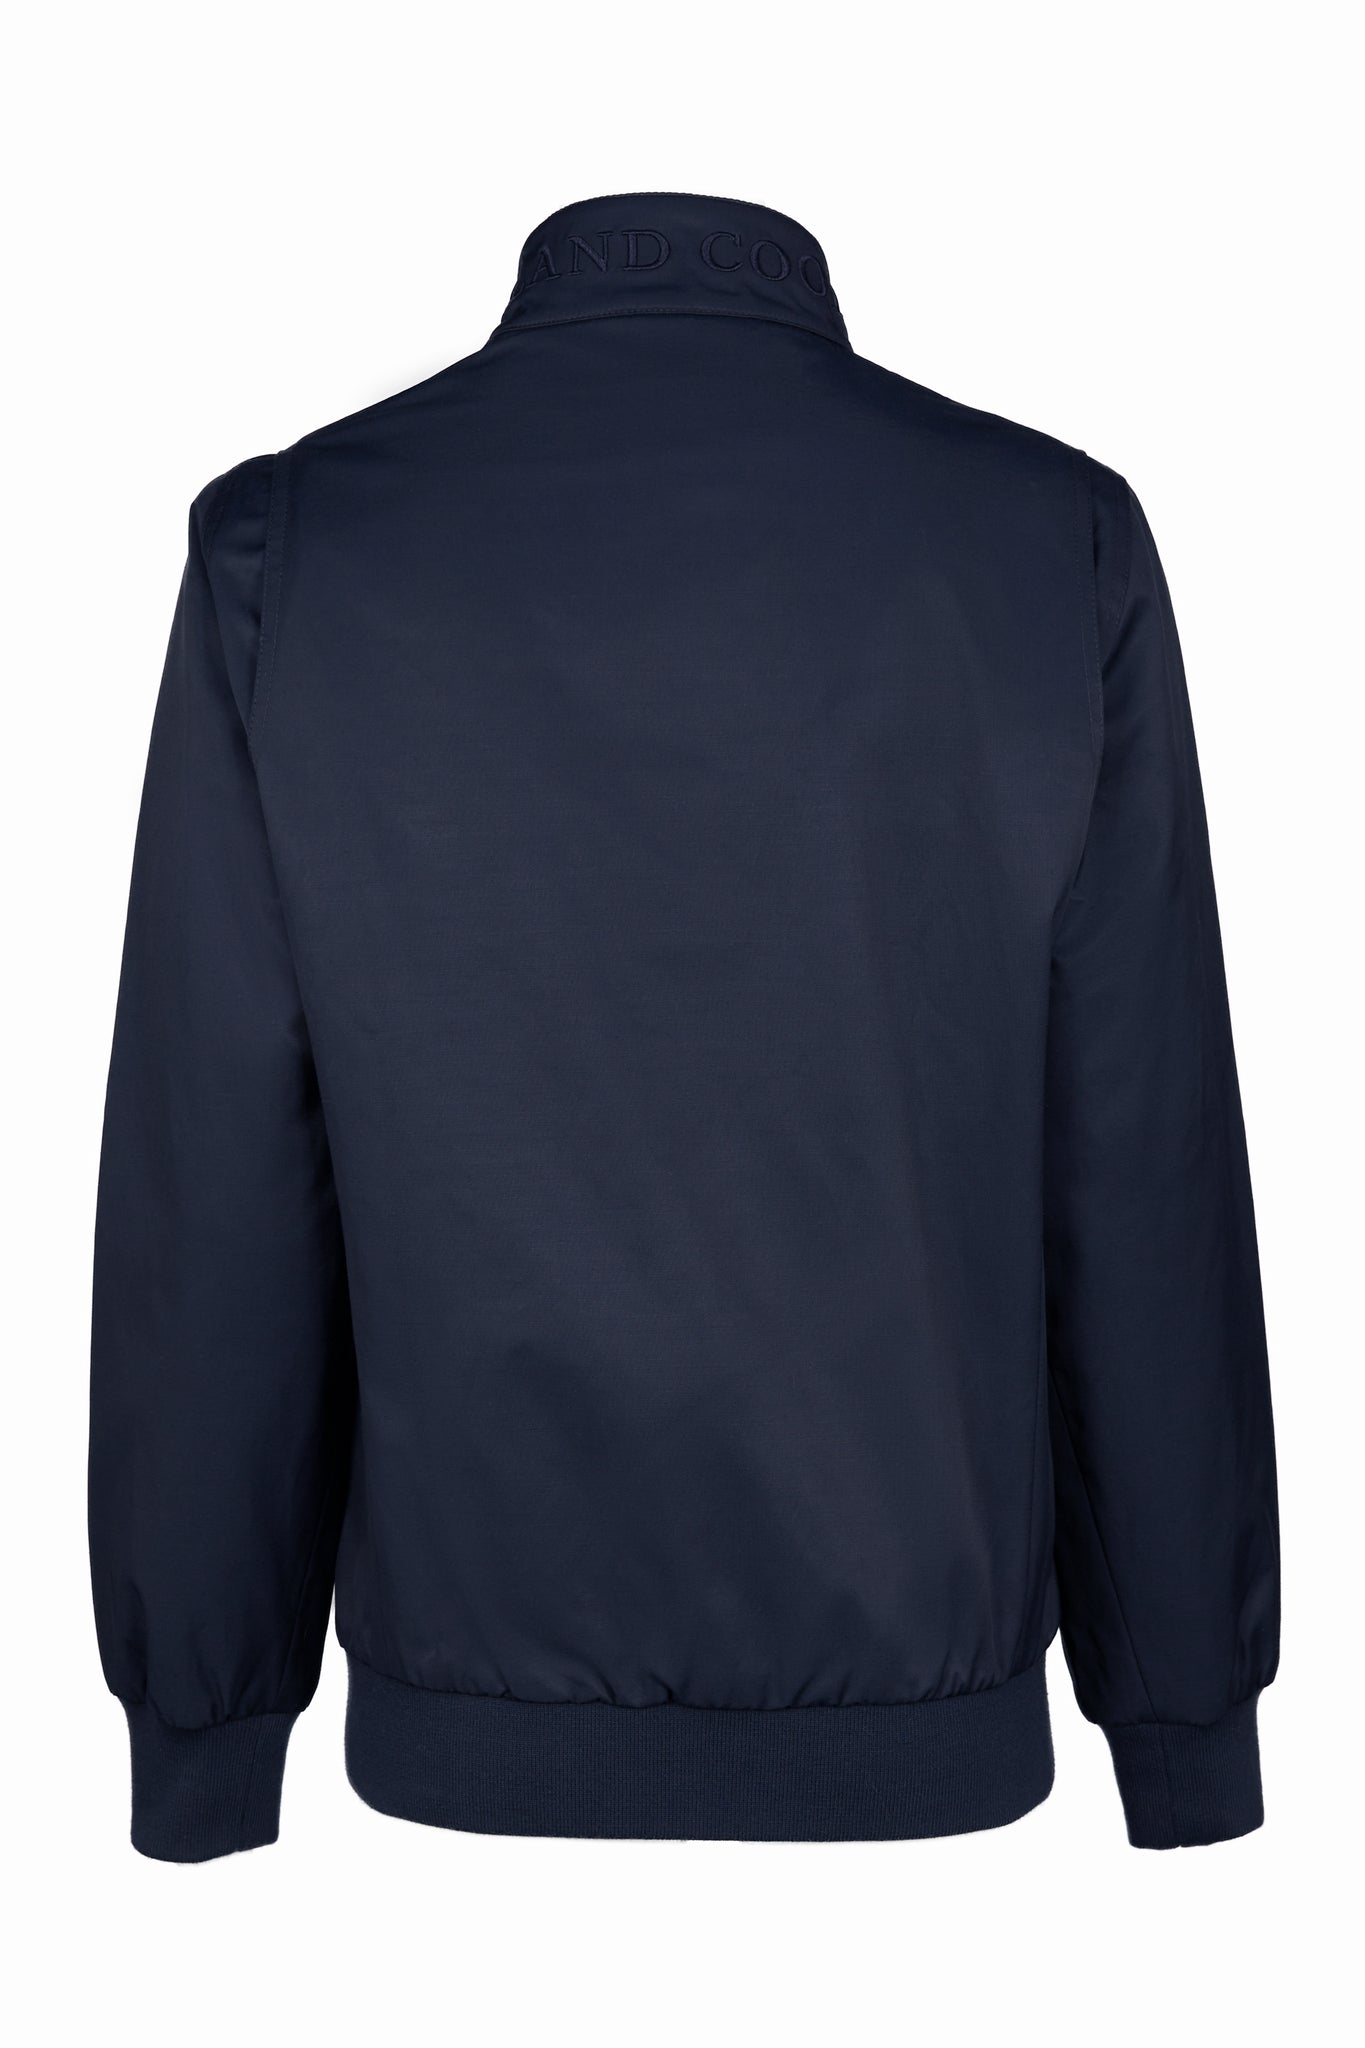 back of Womens navy 100% waterproof hoodless bomber style jacket with ribbed cuffs and hem, two pockets on hips a full zip down the centre front 